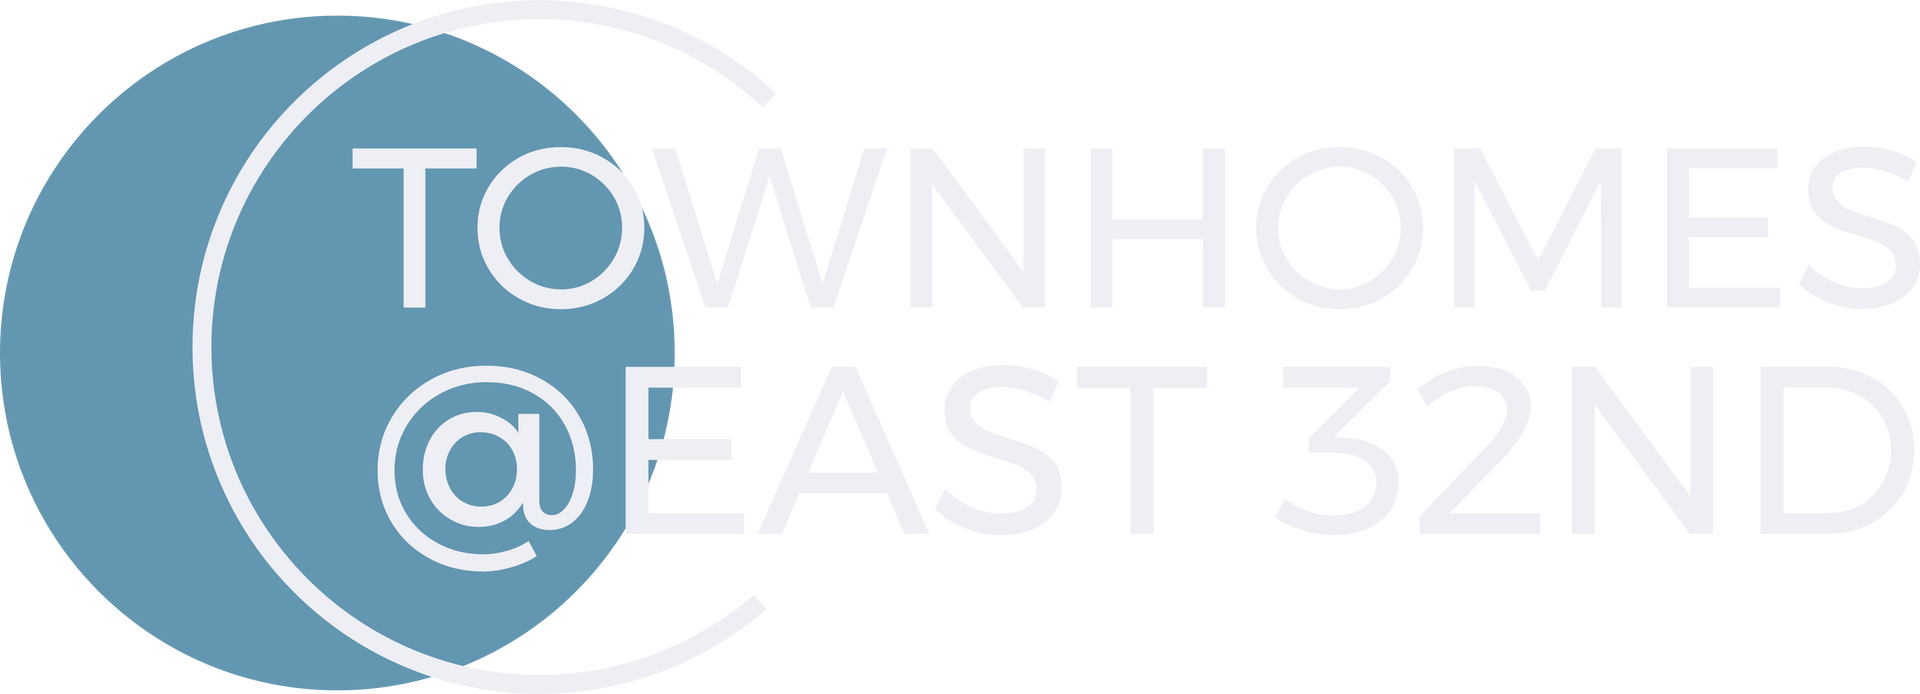 Townhomes @East 32nd Logo